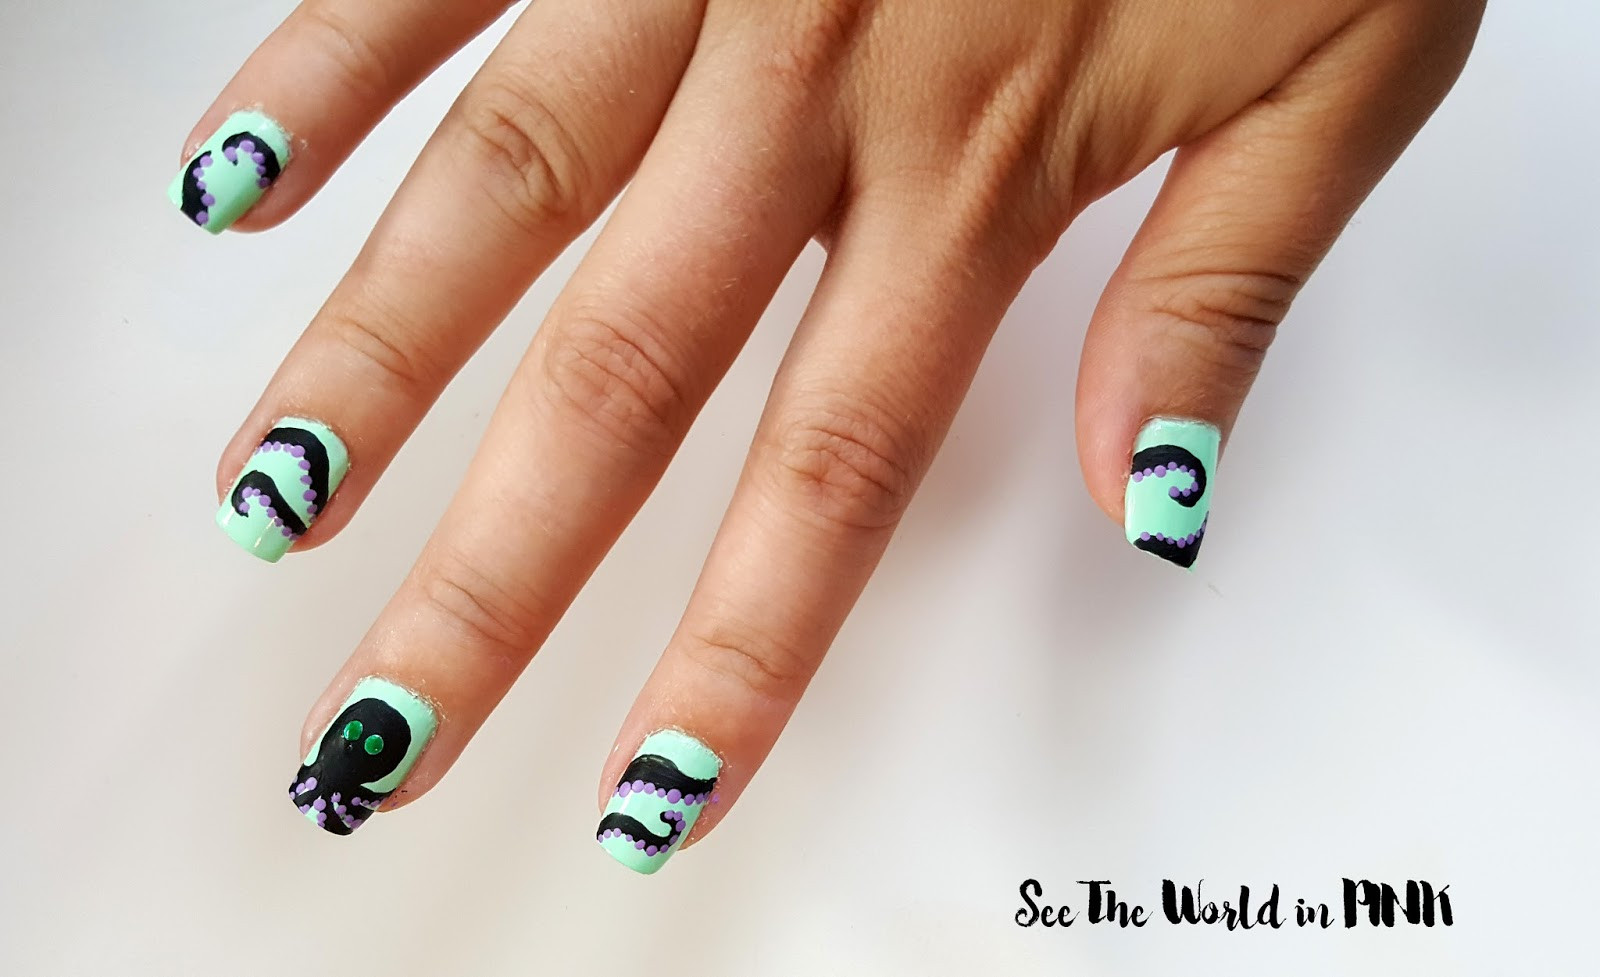 Octopus Nail Art
 Manicure Monday Octopus Nail Art Monthly Pedicure